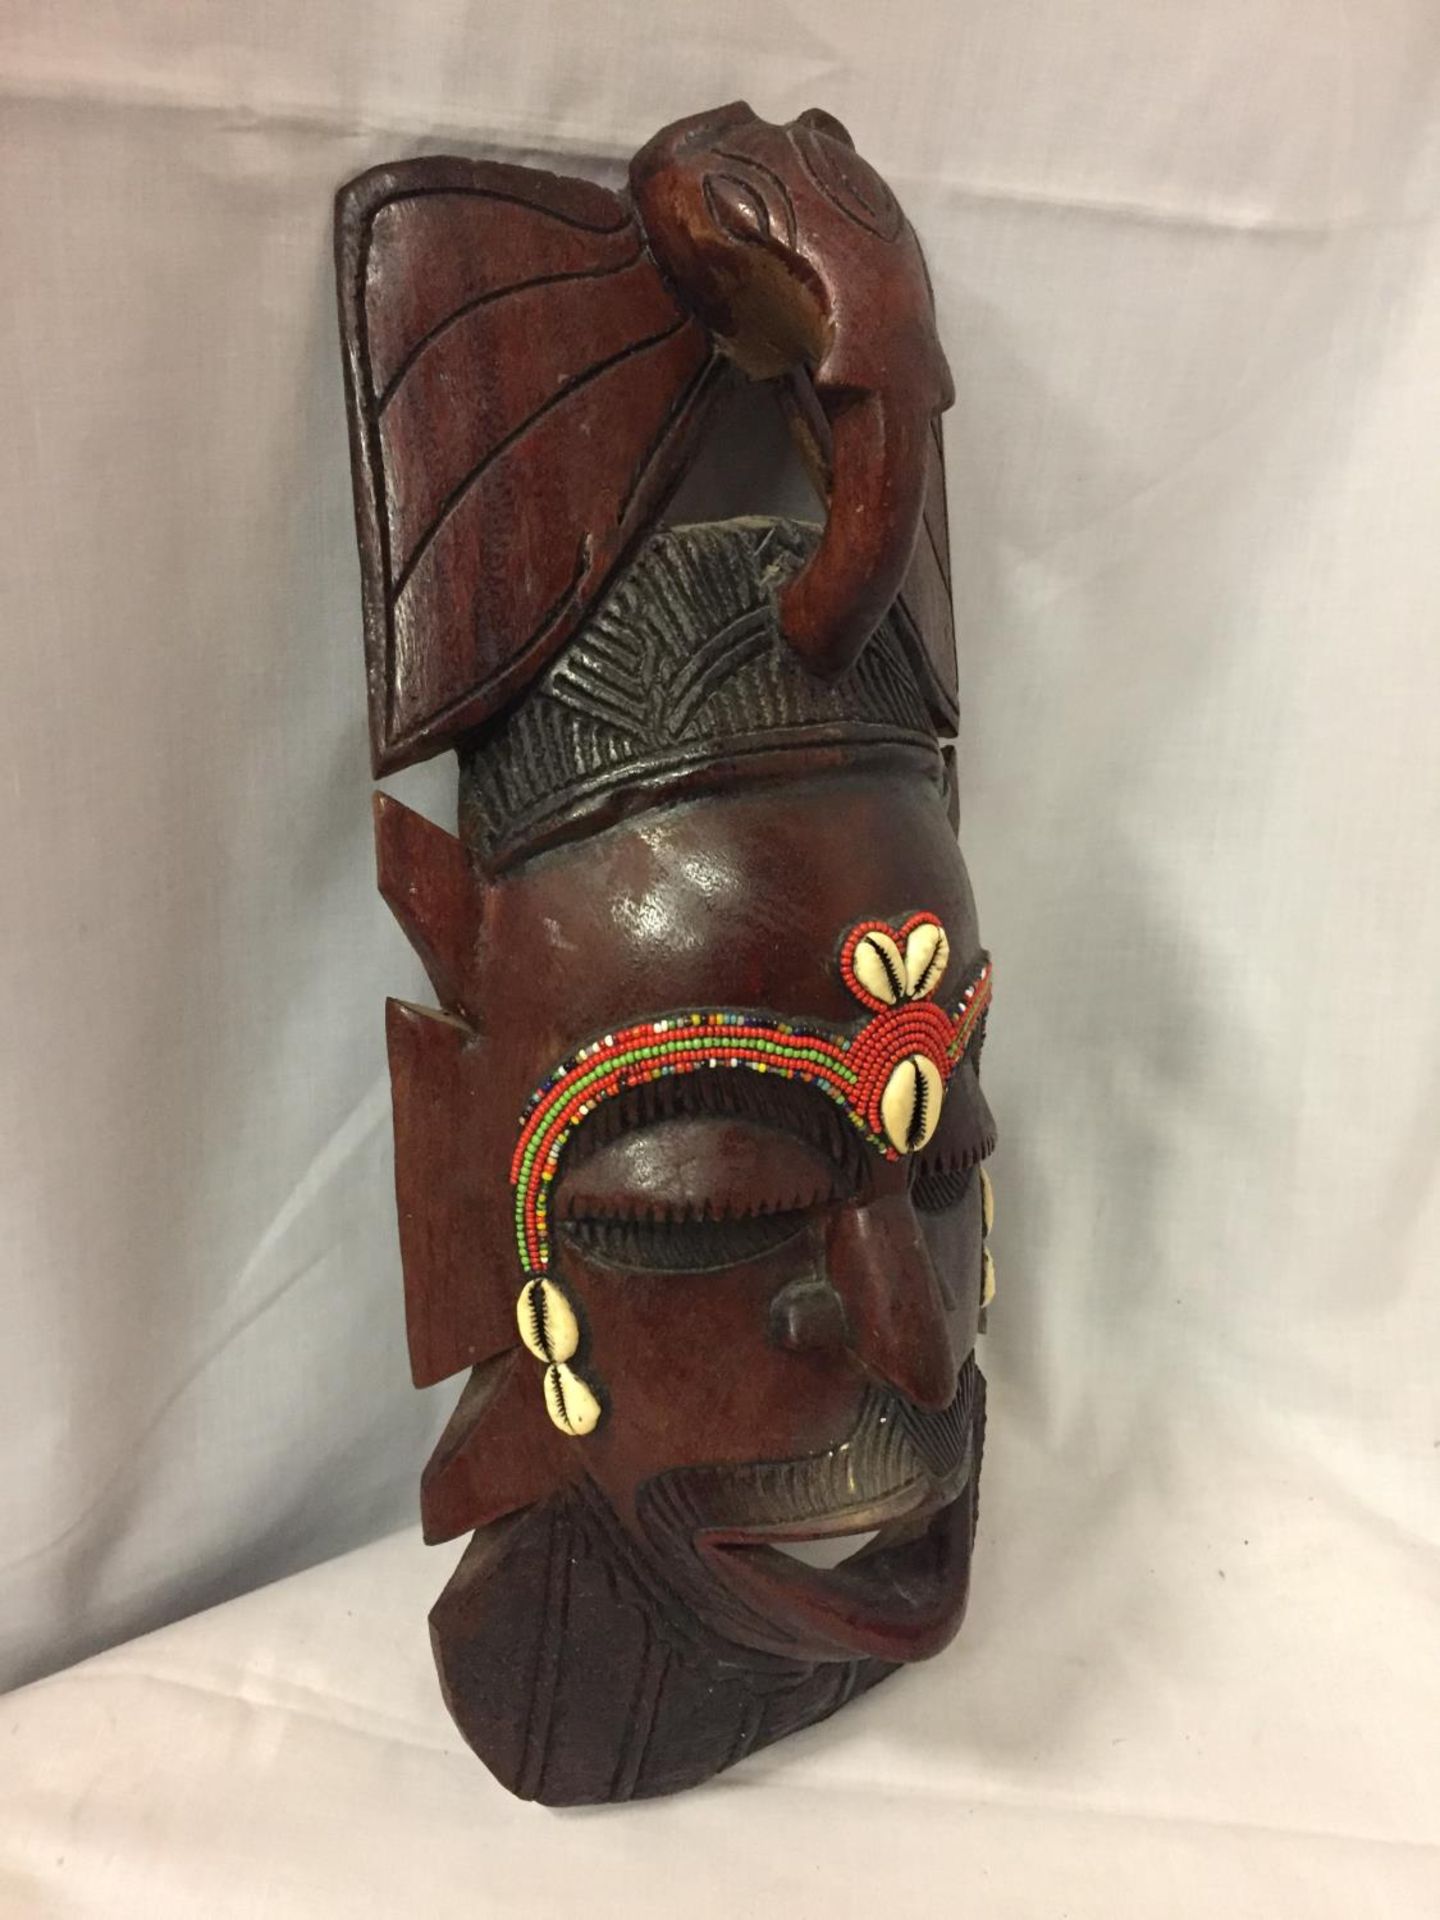 A CARVED WOODEN TRIBAL INSPIRED MASK WALL HANGING - Image 2 of 3